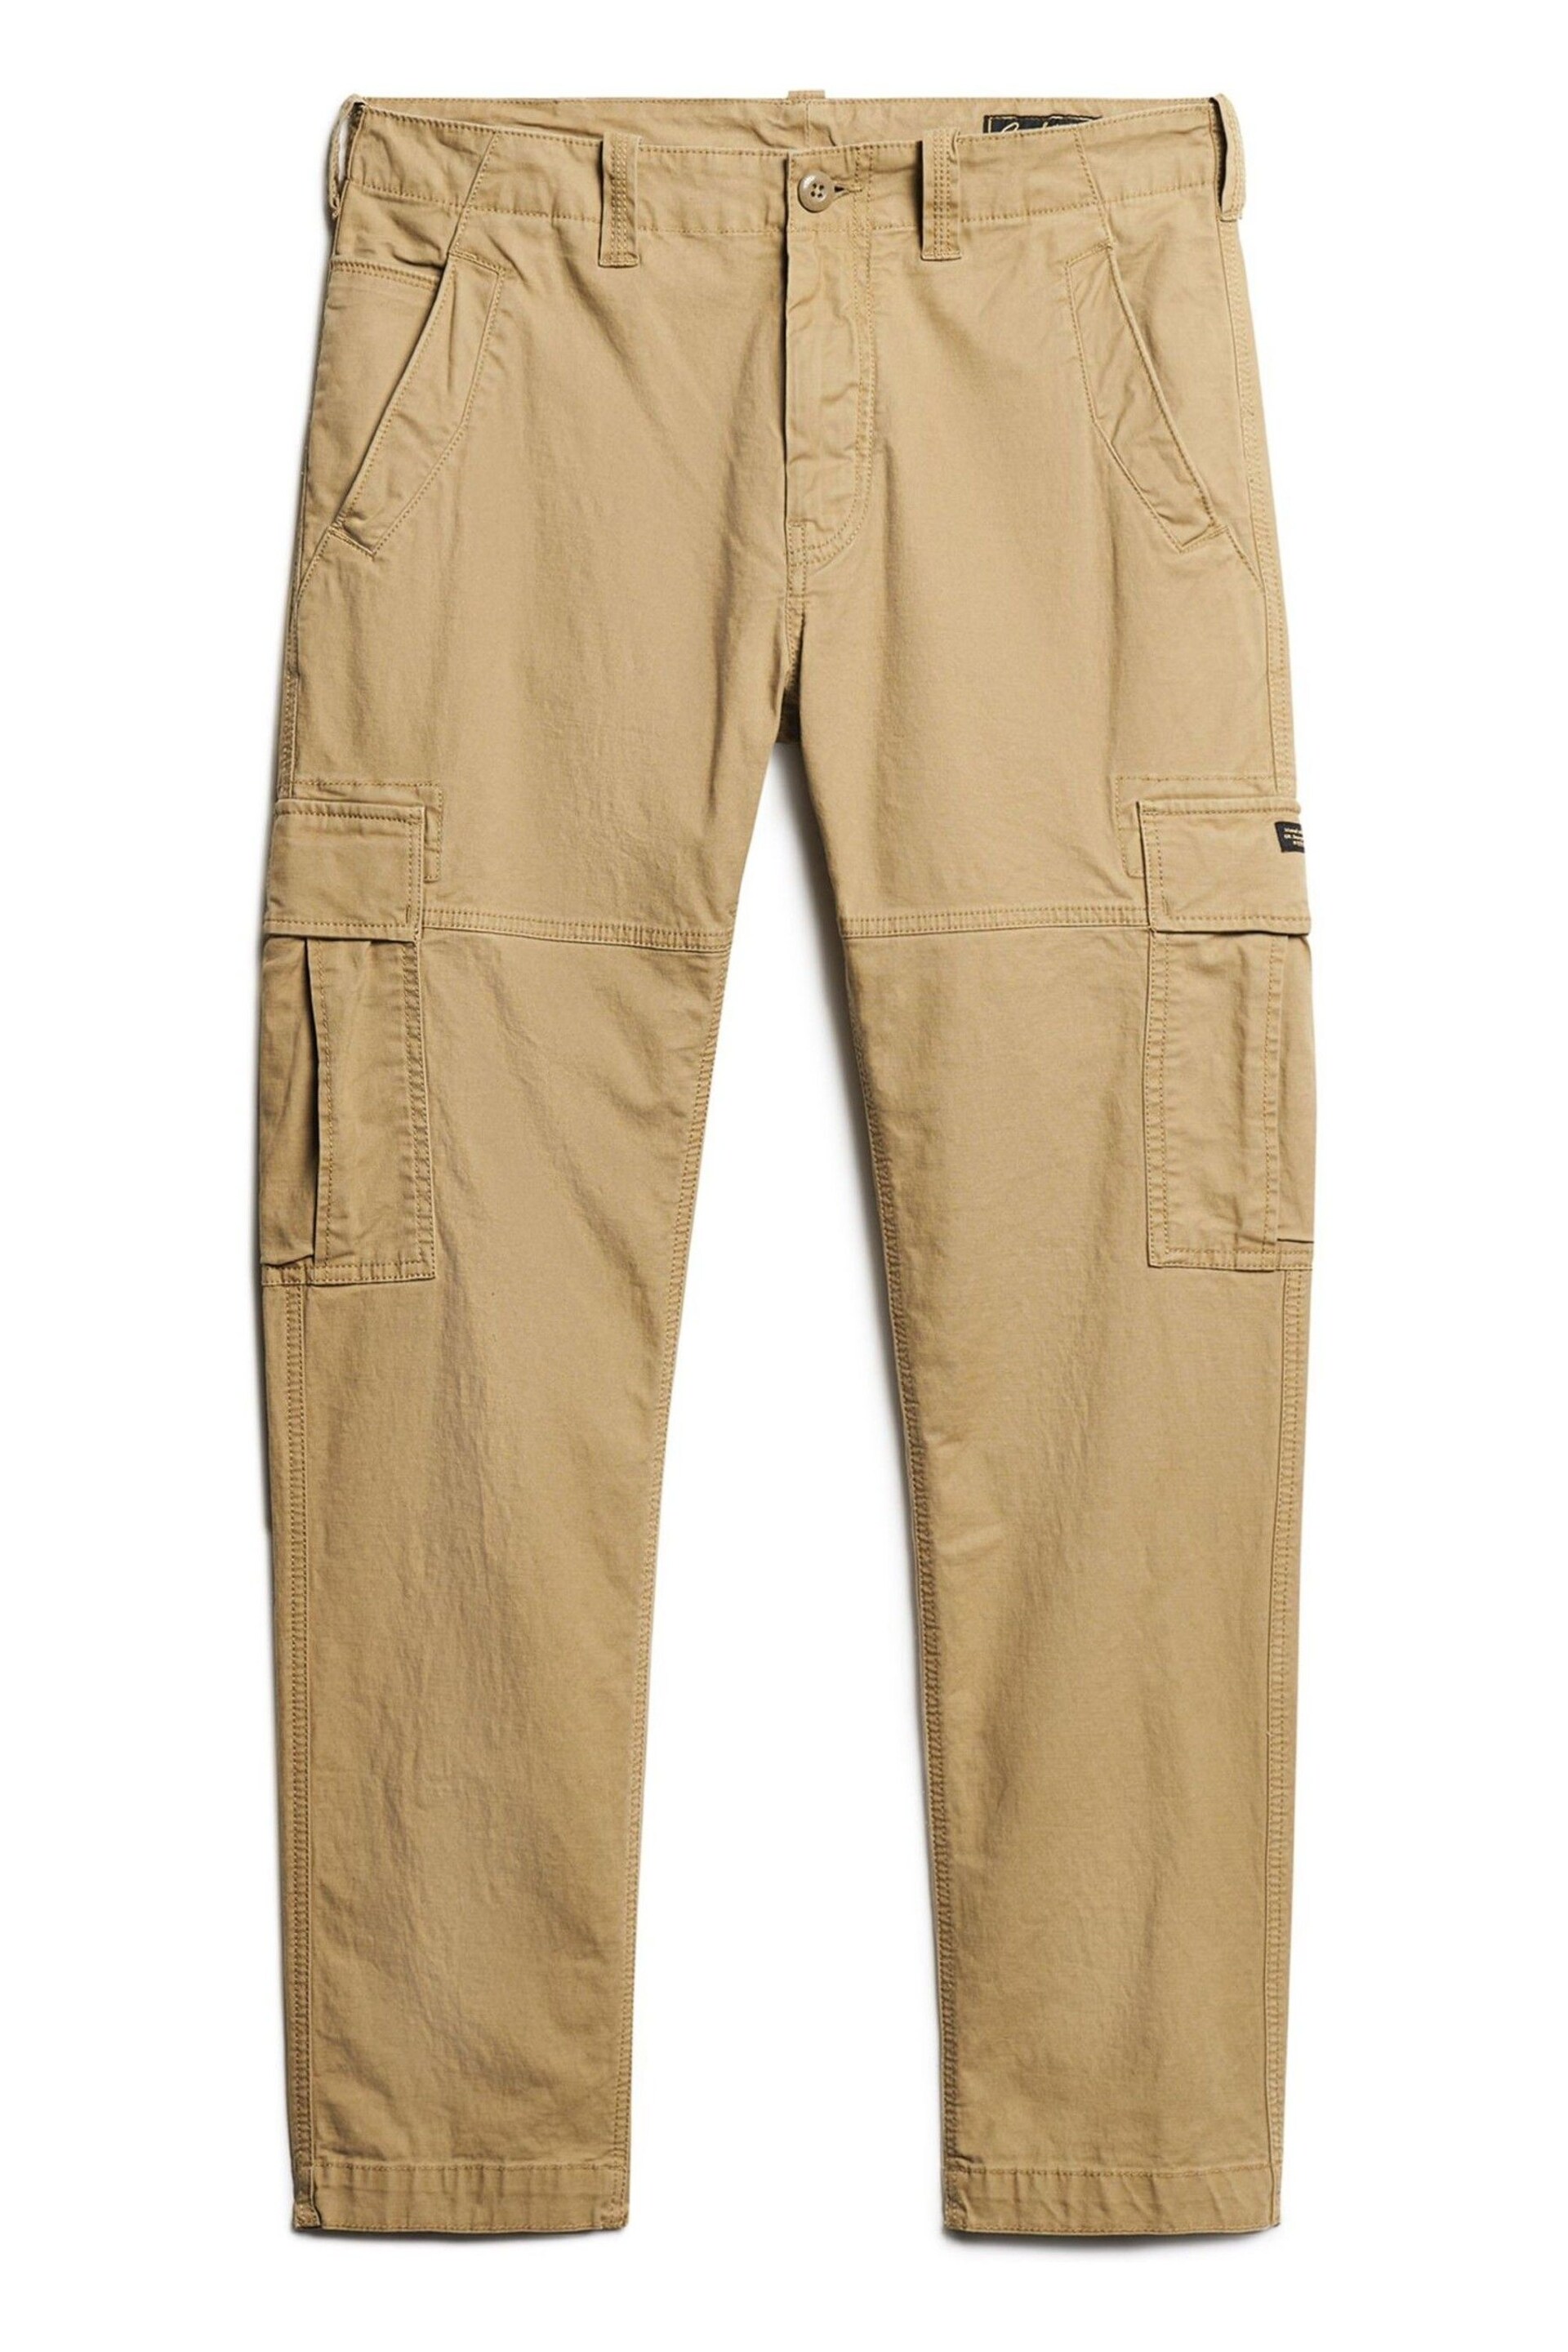 Superdry Cream Core Cargo Trousers - Image 7 of 9